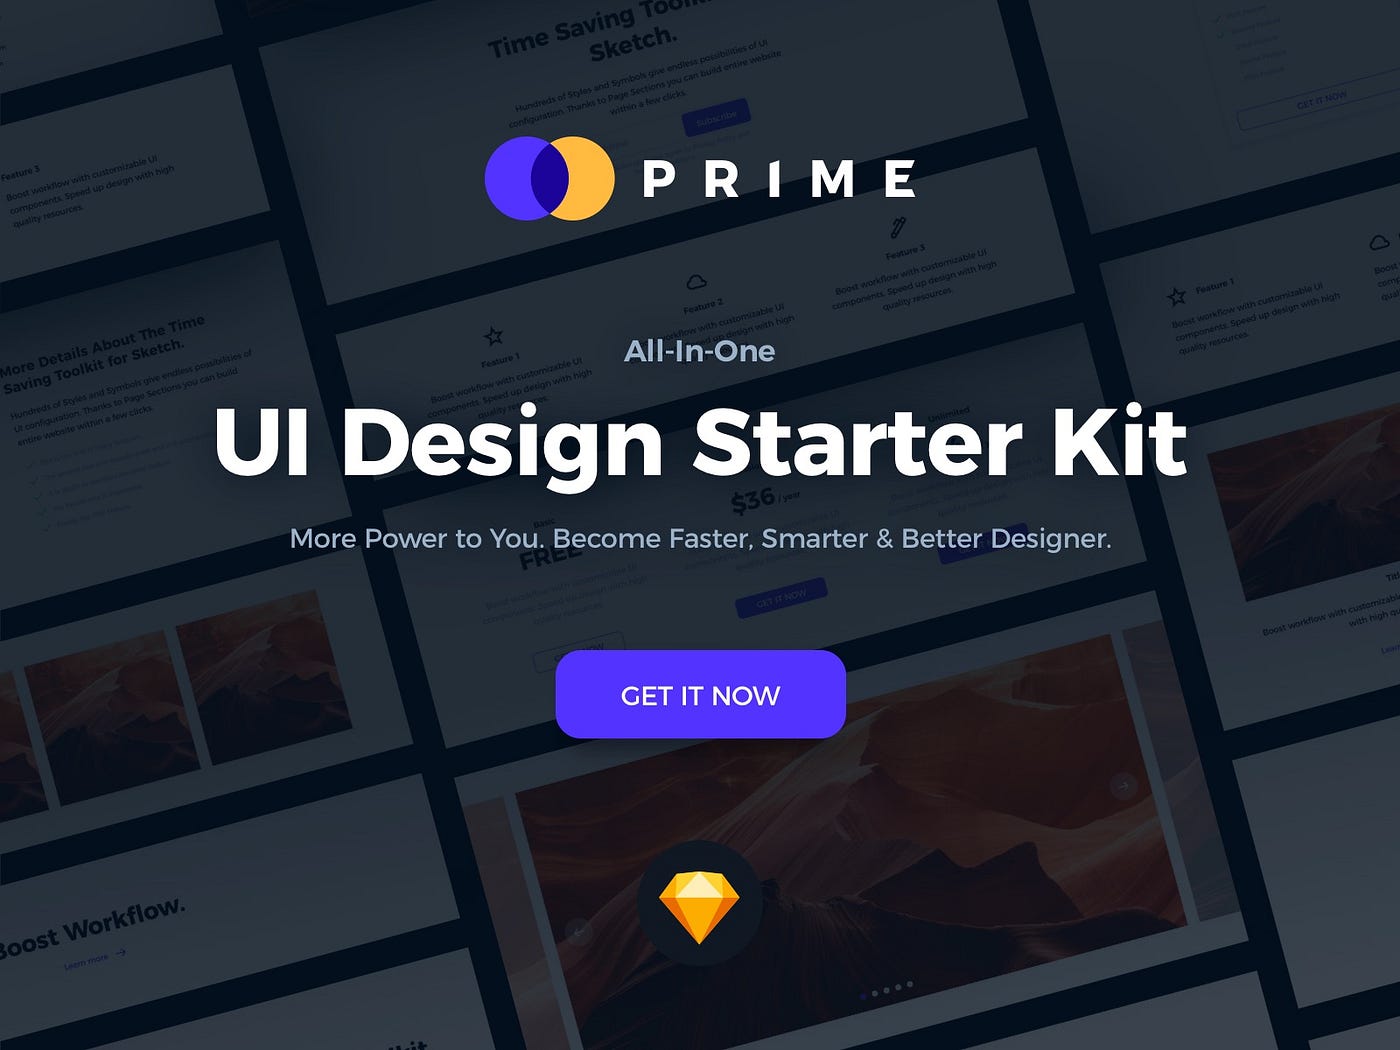 Design Systems + Sketch — How to start preparing UI Components